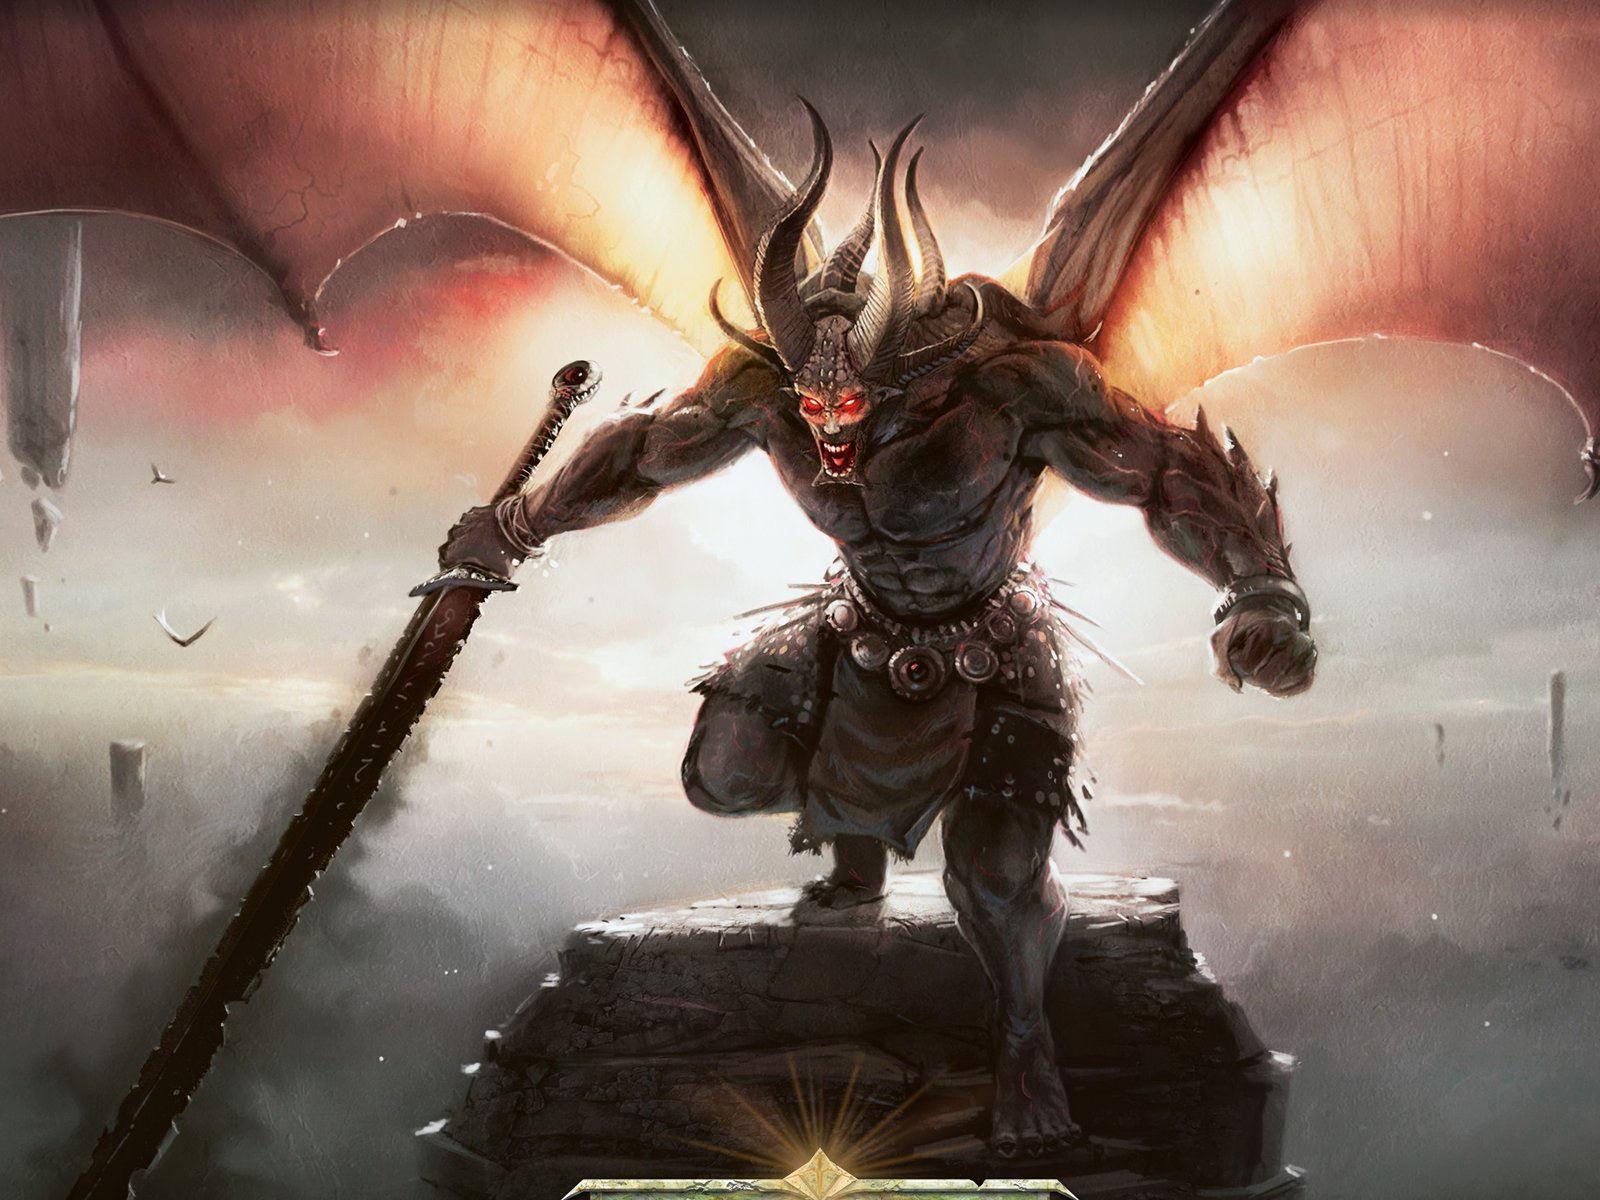 Hellriser Lord with Wings wallpaper from Fantasy wallpaper